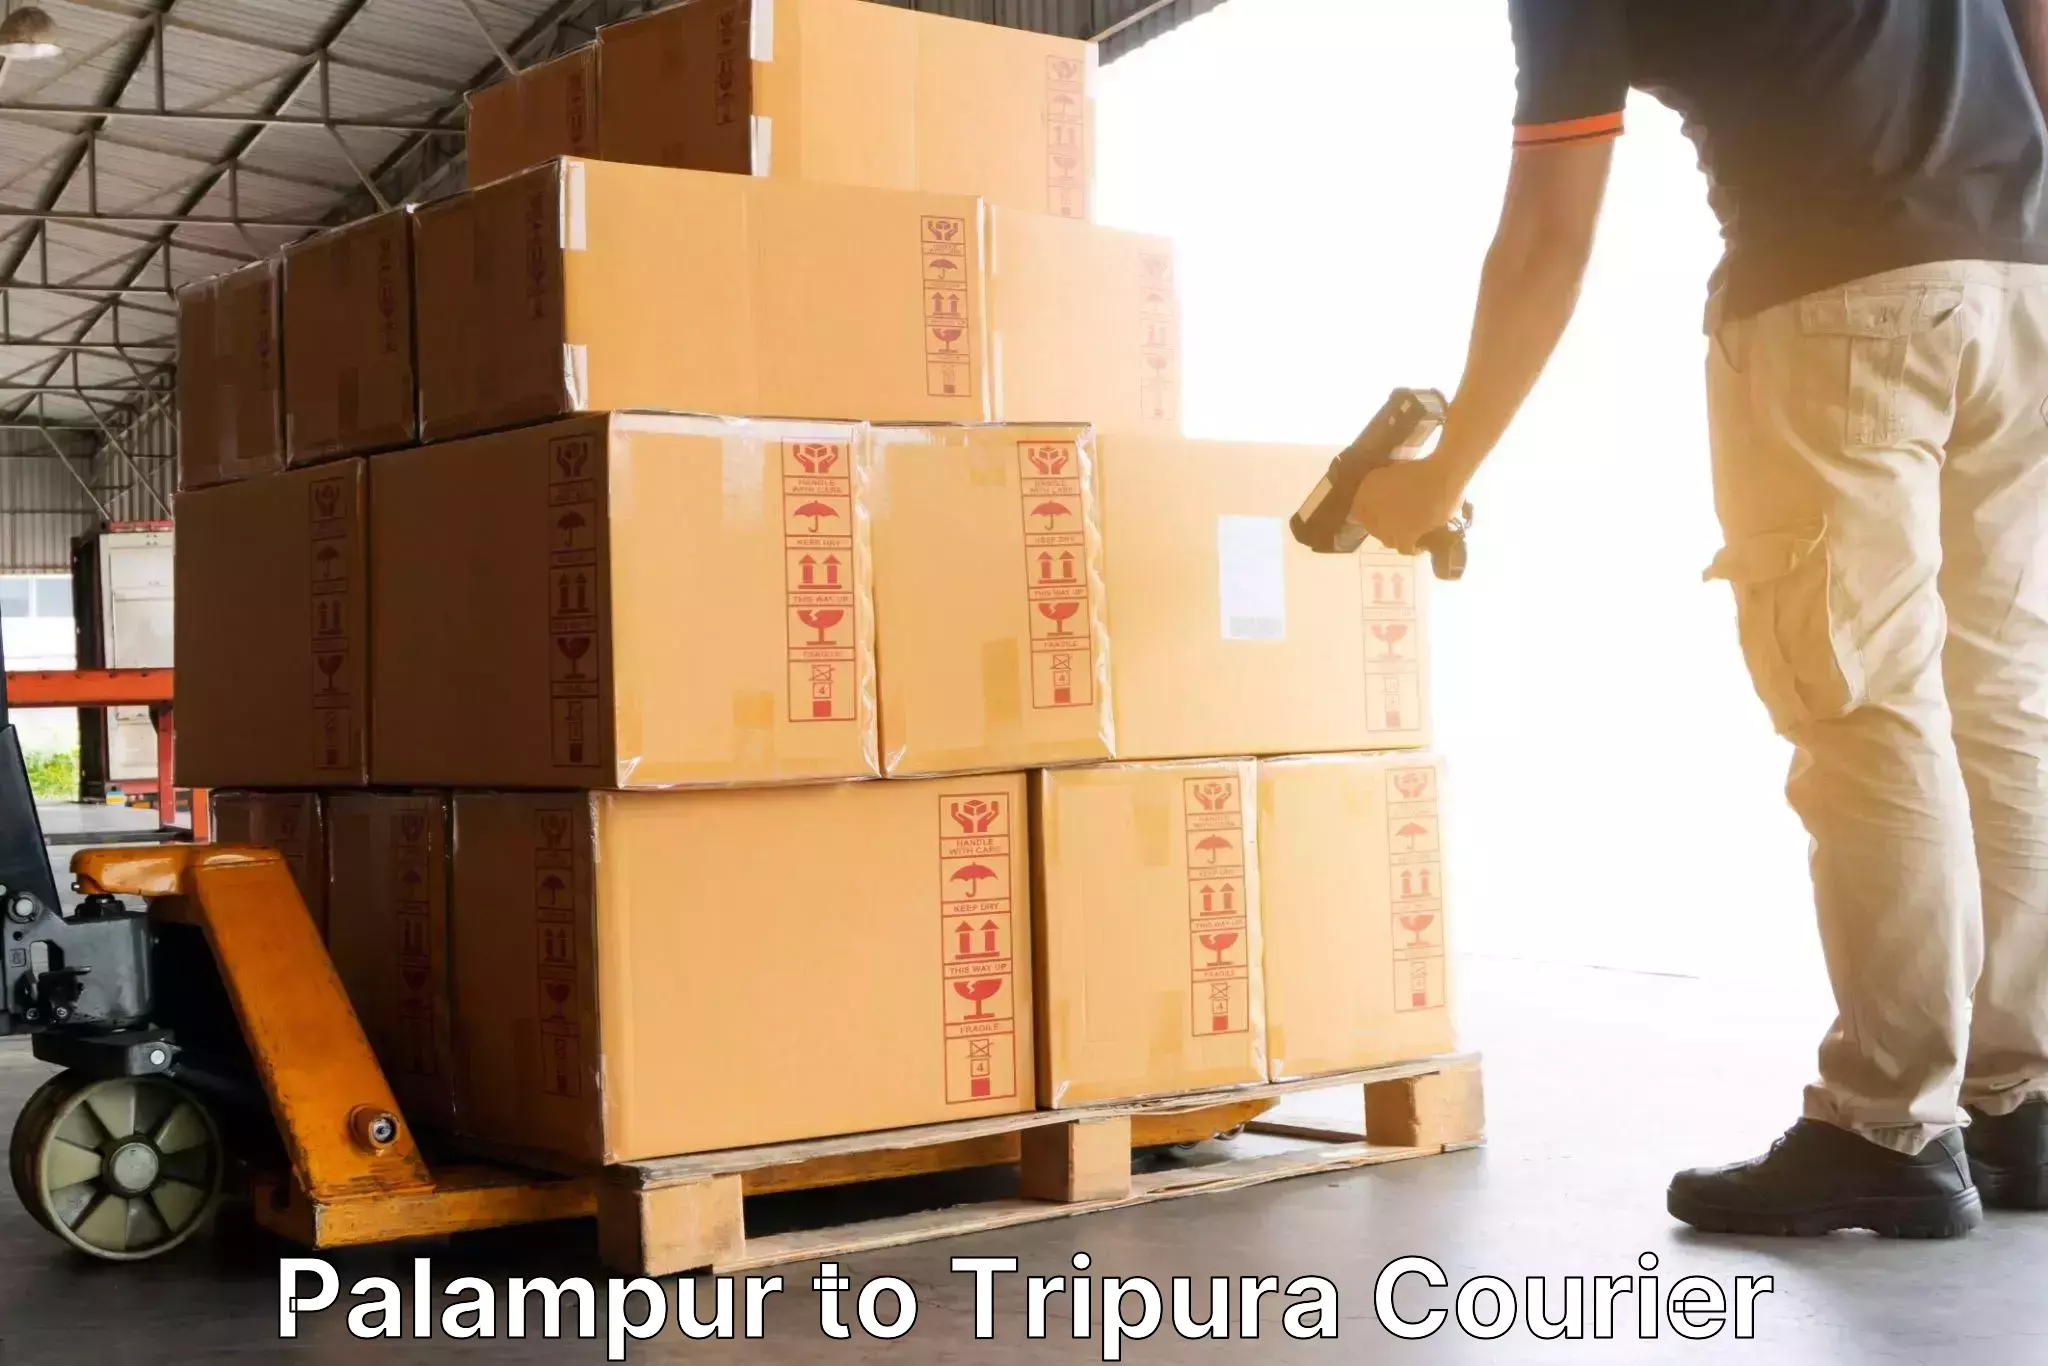 Efficient freight service Palampur to Tripura